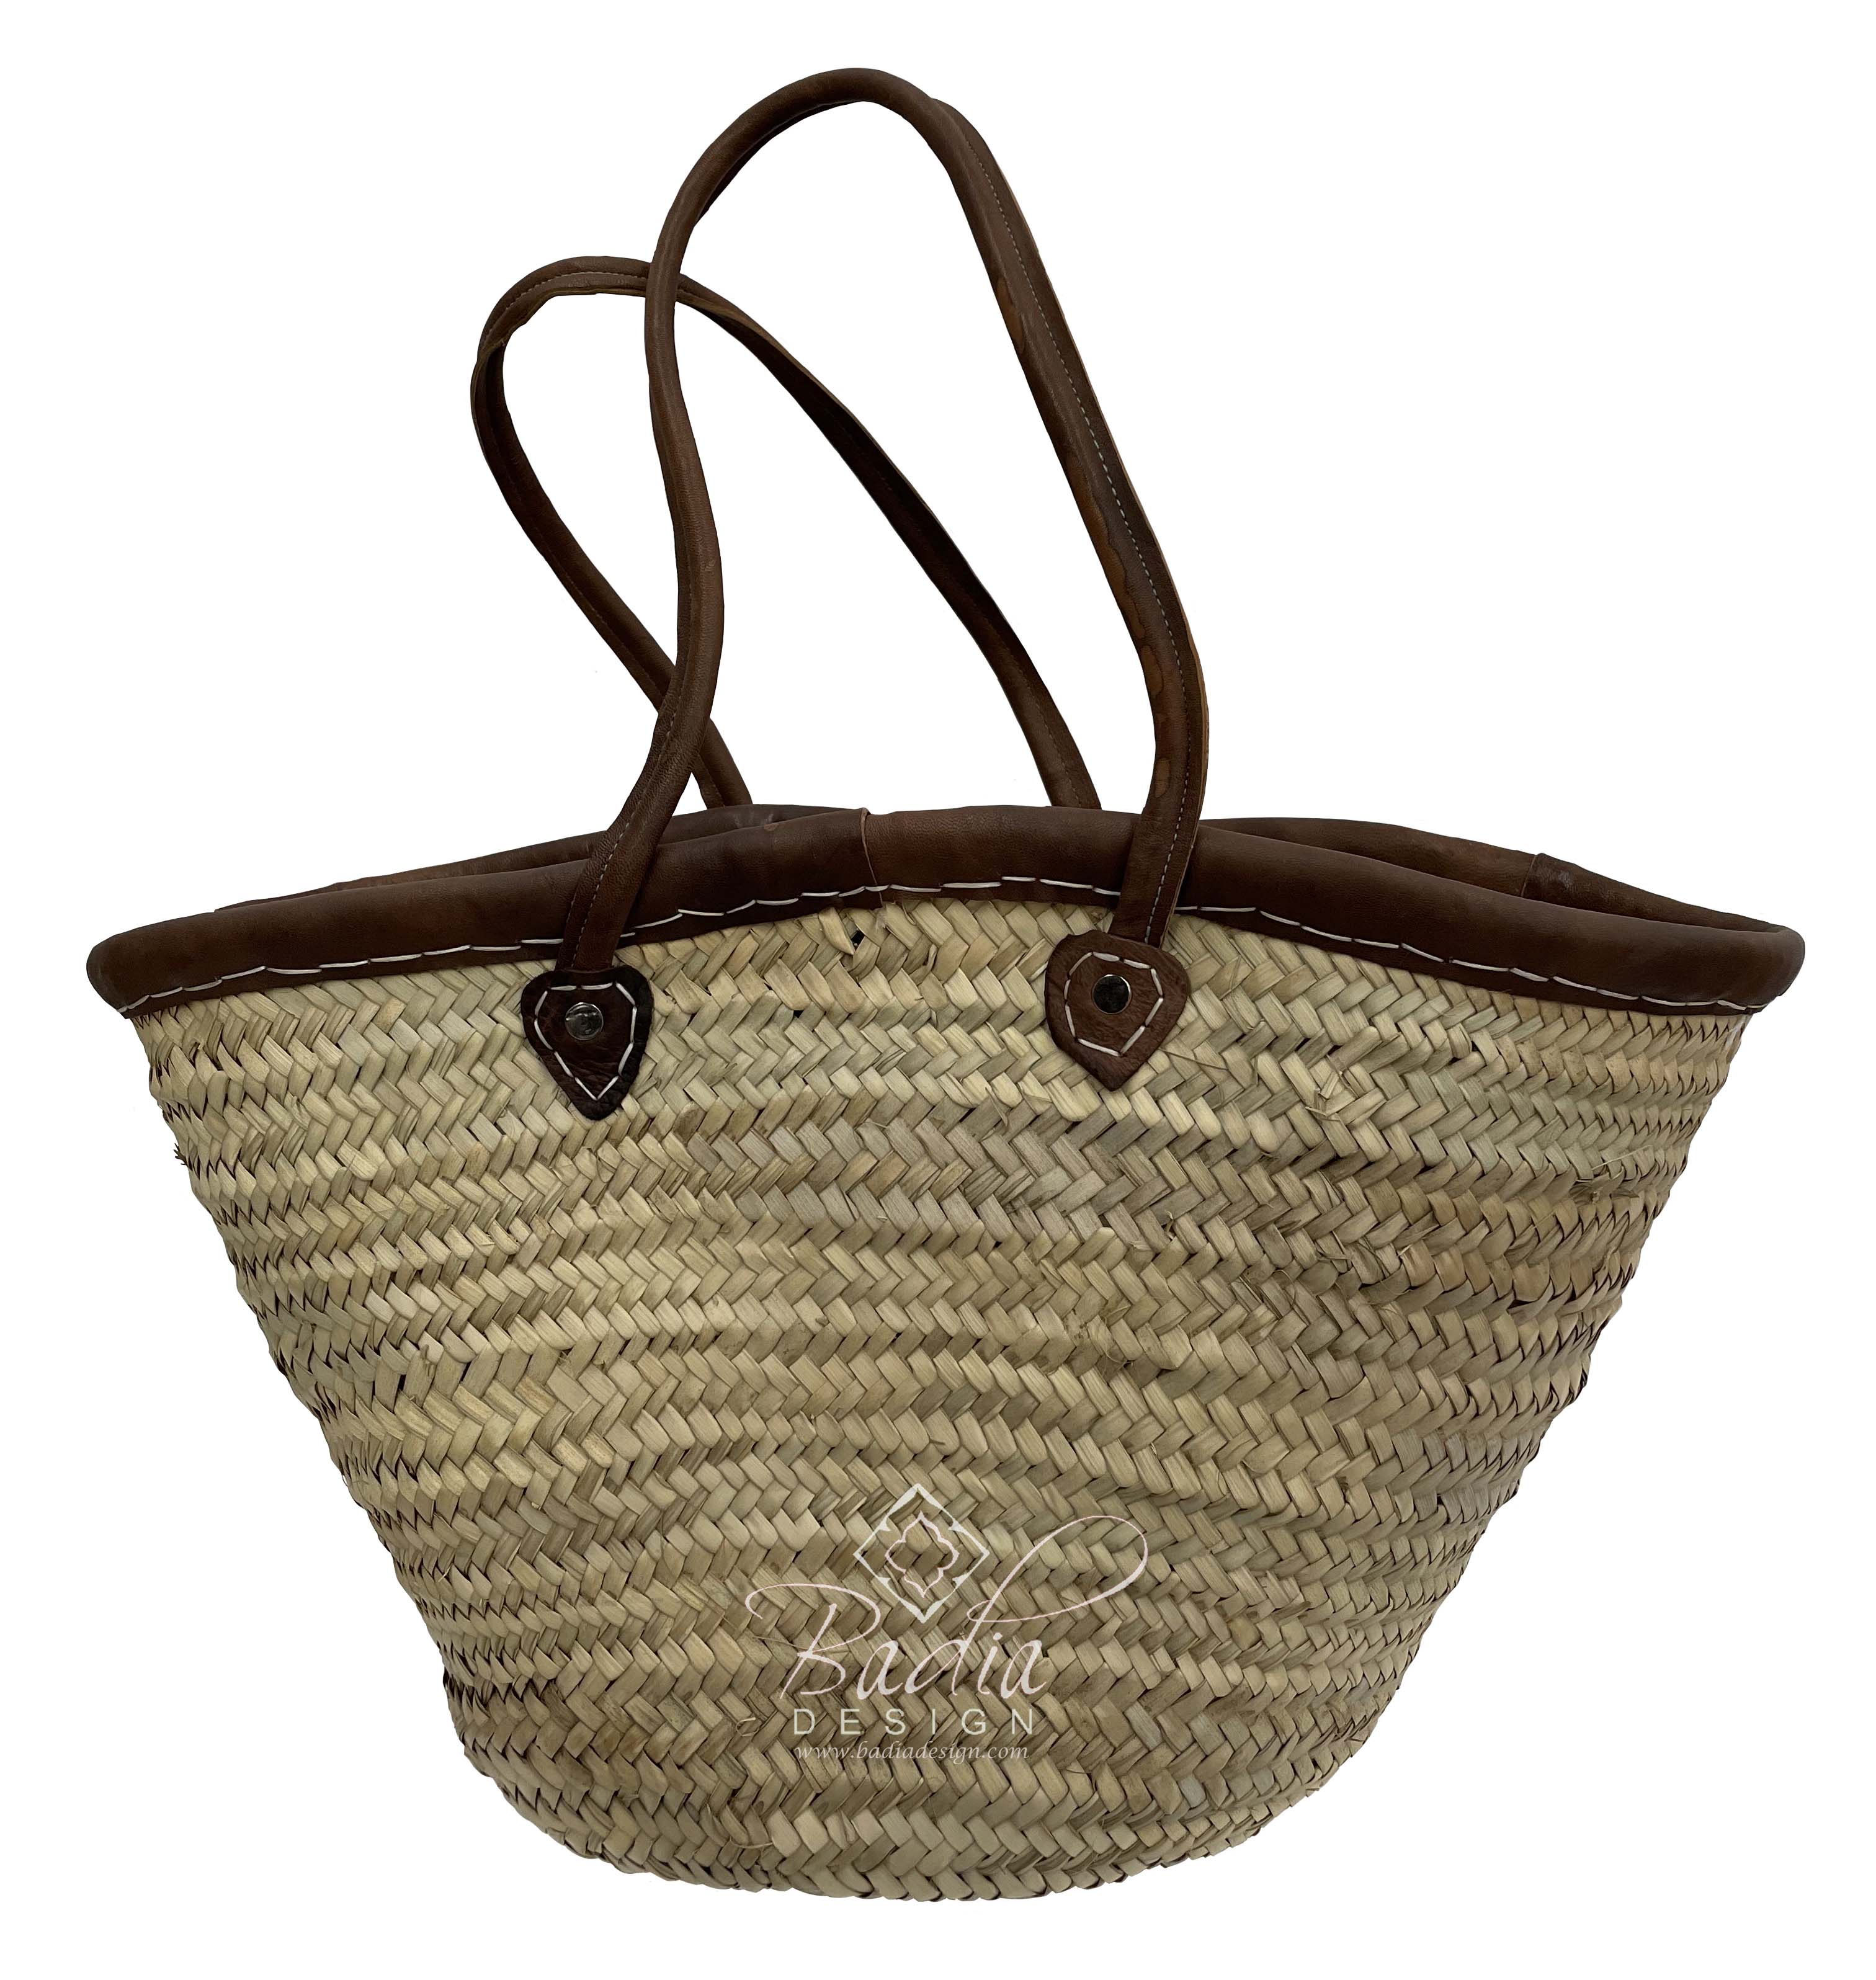 moroccan-handwoven-straw-basket-with-leather-handle-hb018-1.jpg